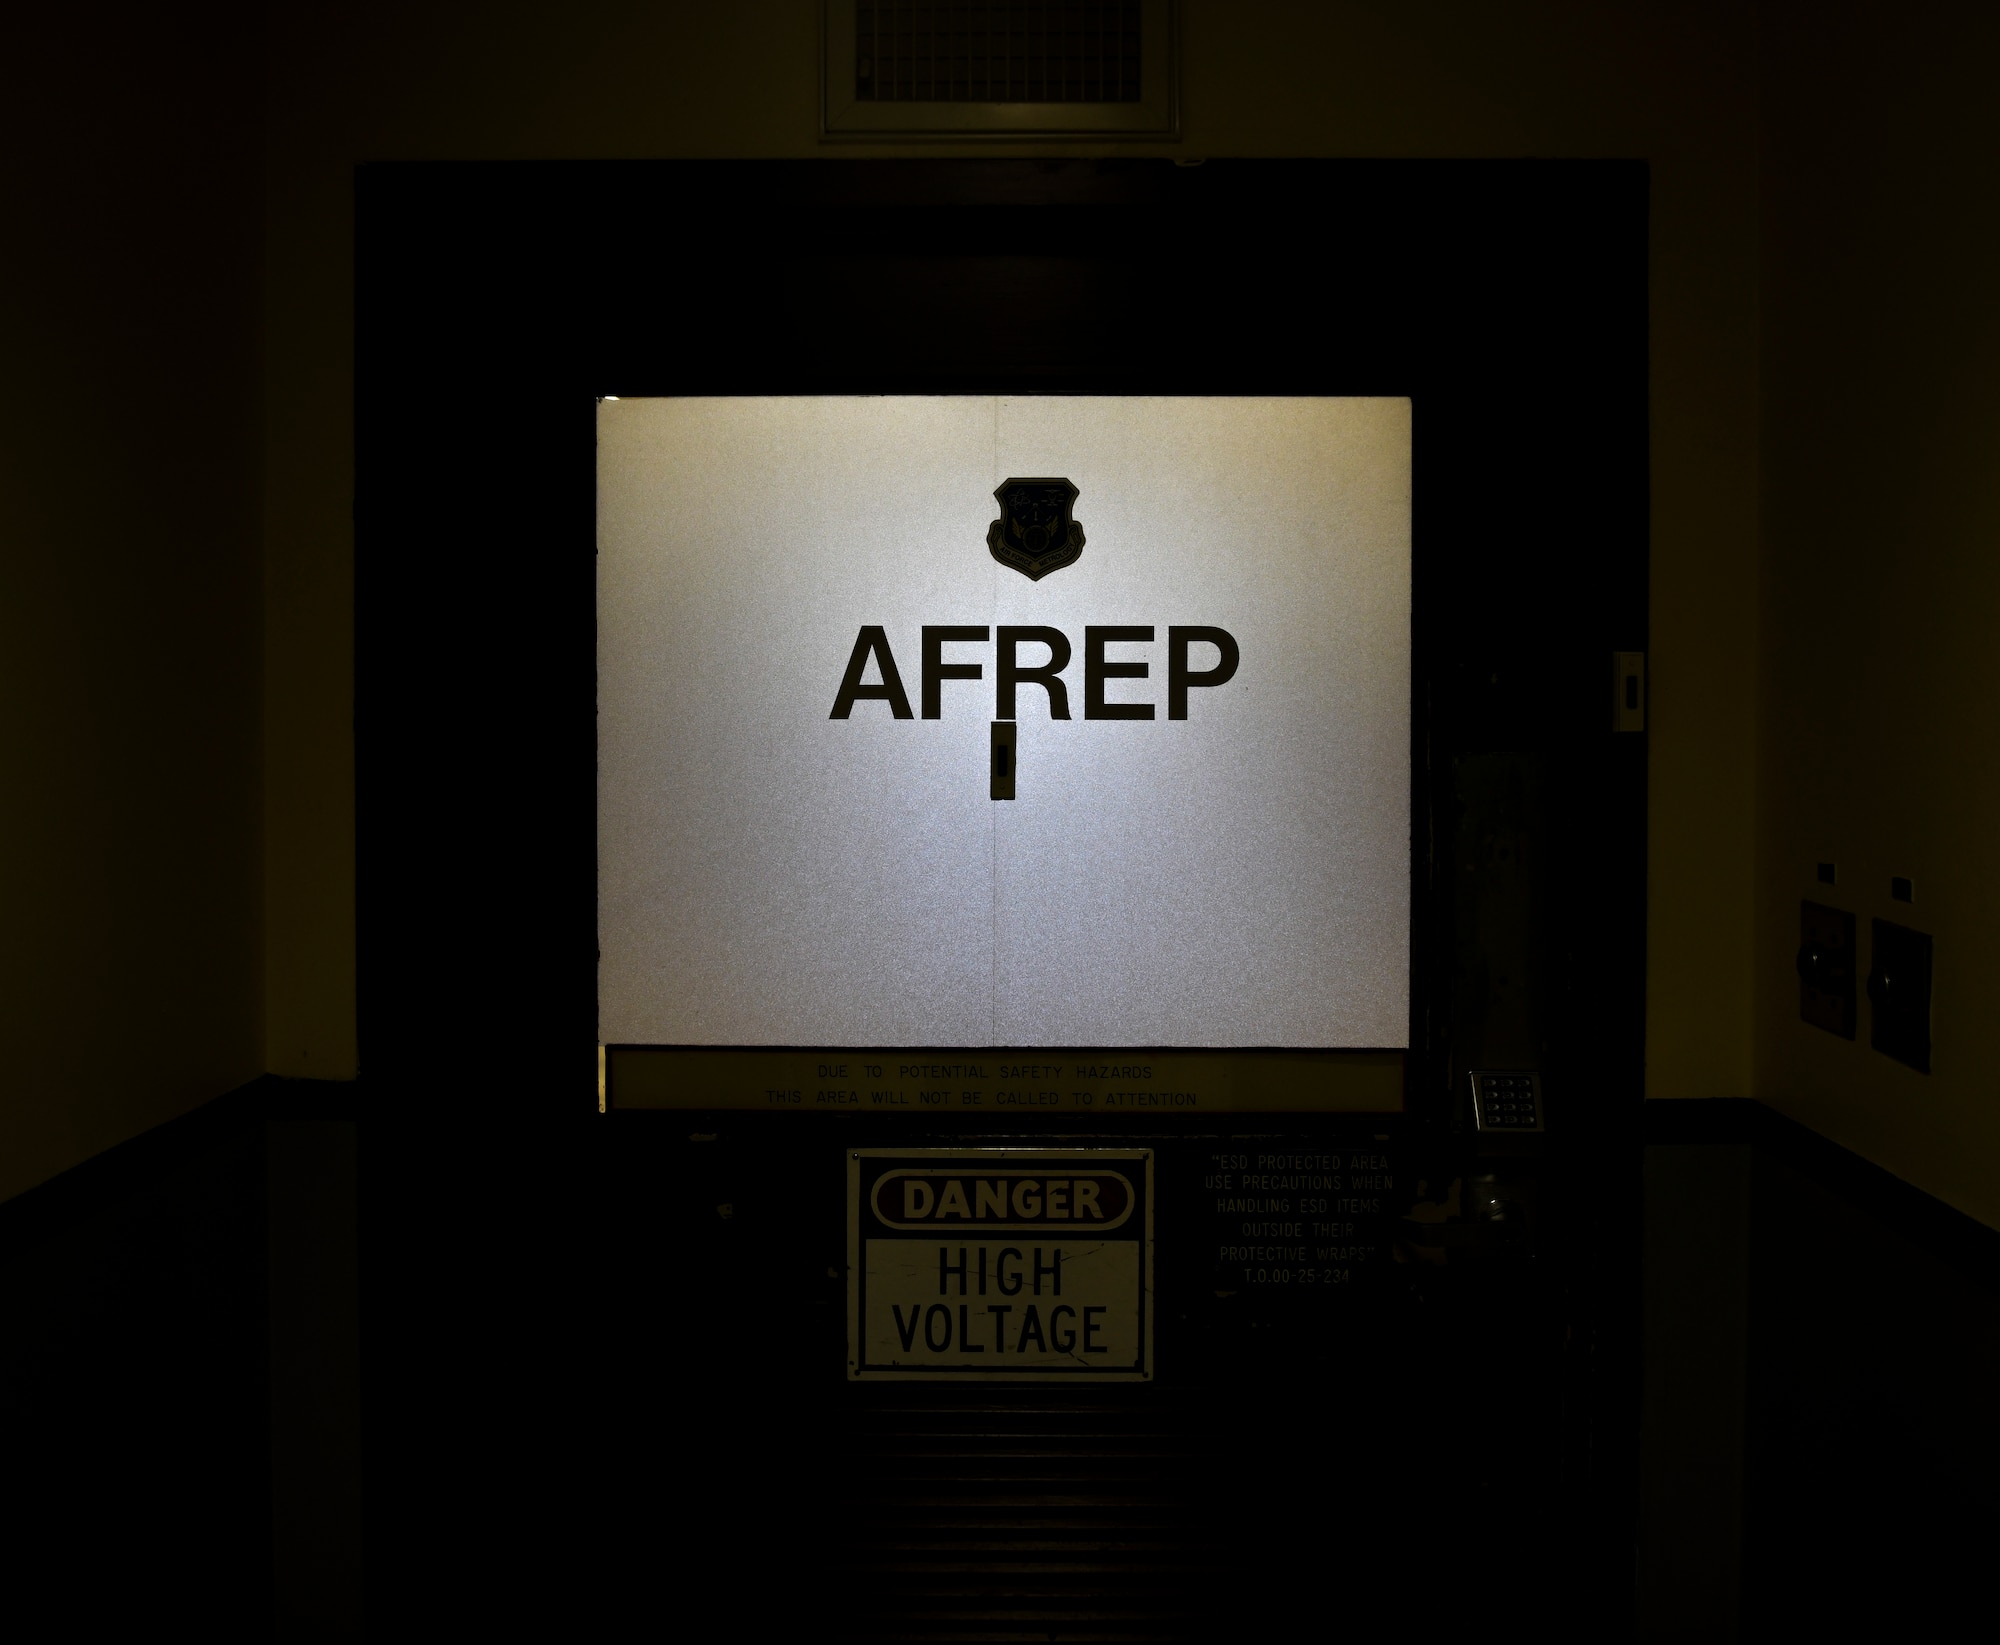 AFREP works on various equipment from printers, monitors, electronics to U-2 Dragonlady components and so much more.